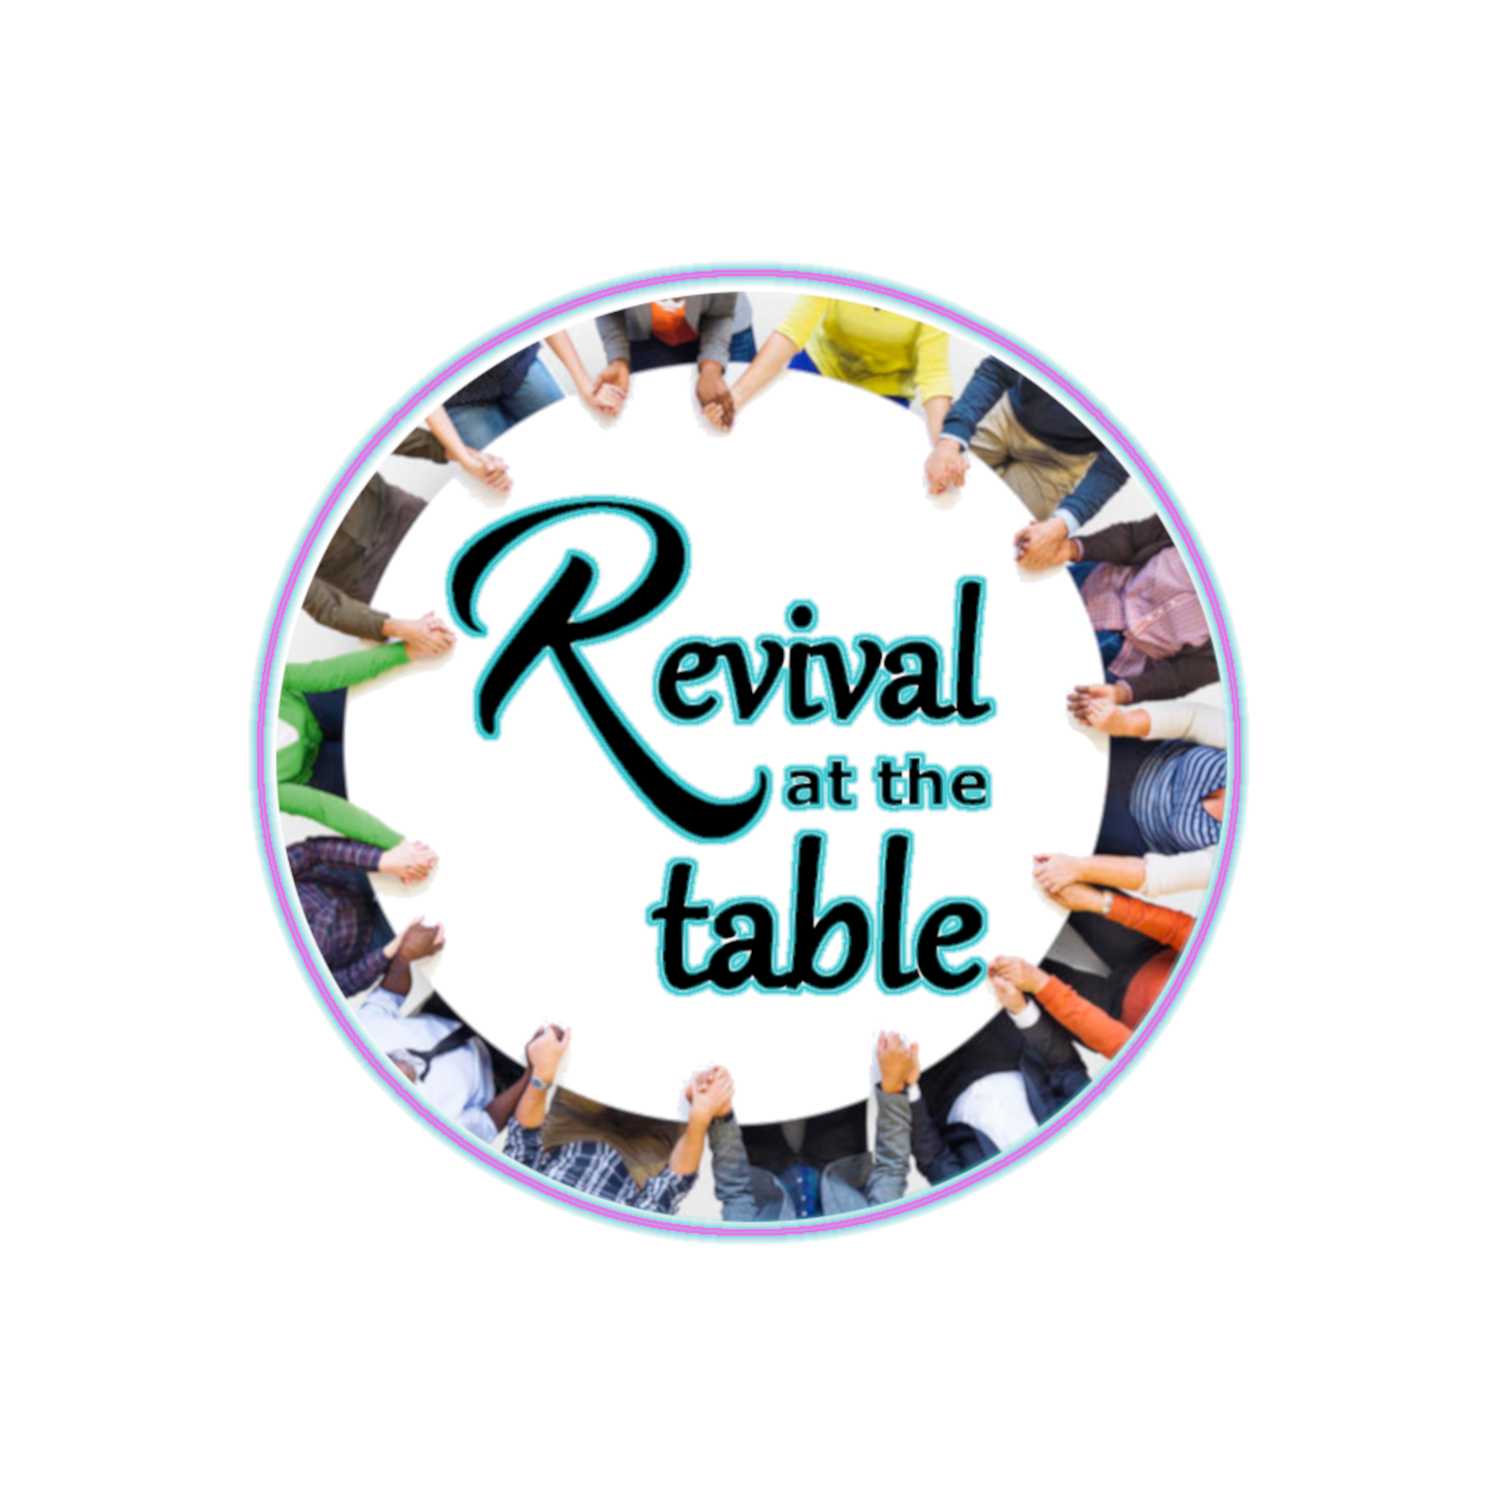 Revival at the Table